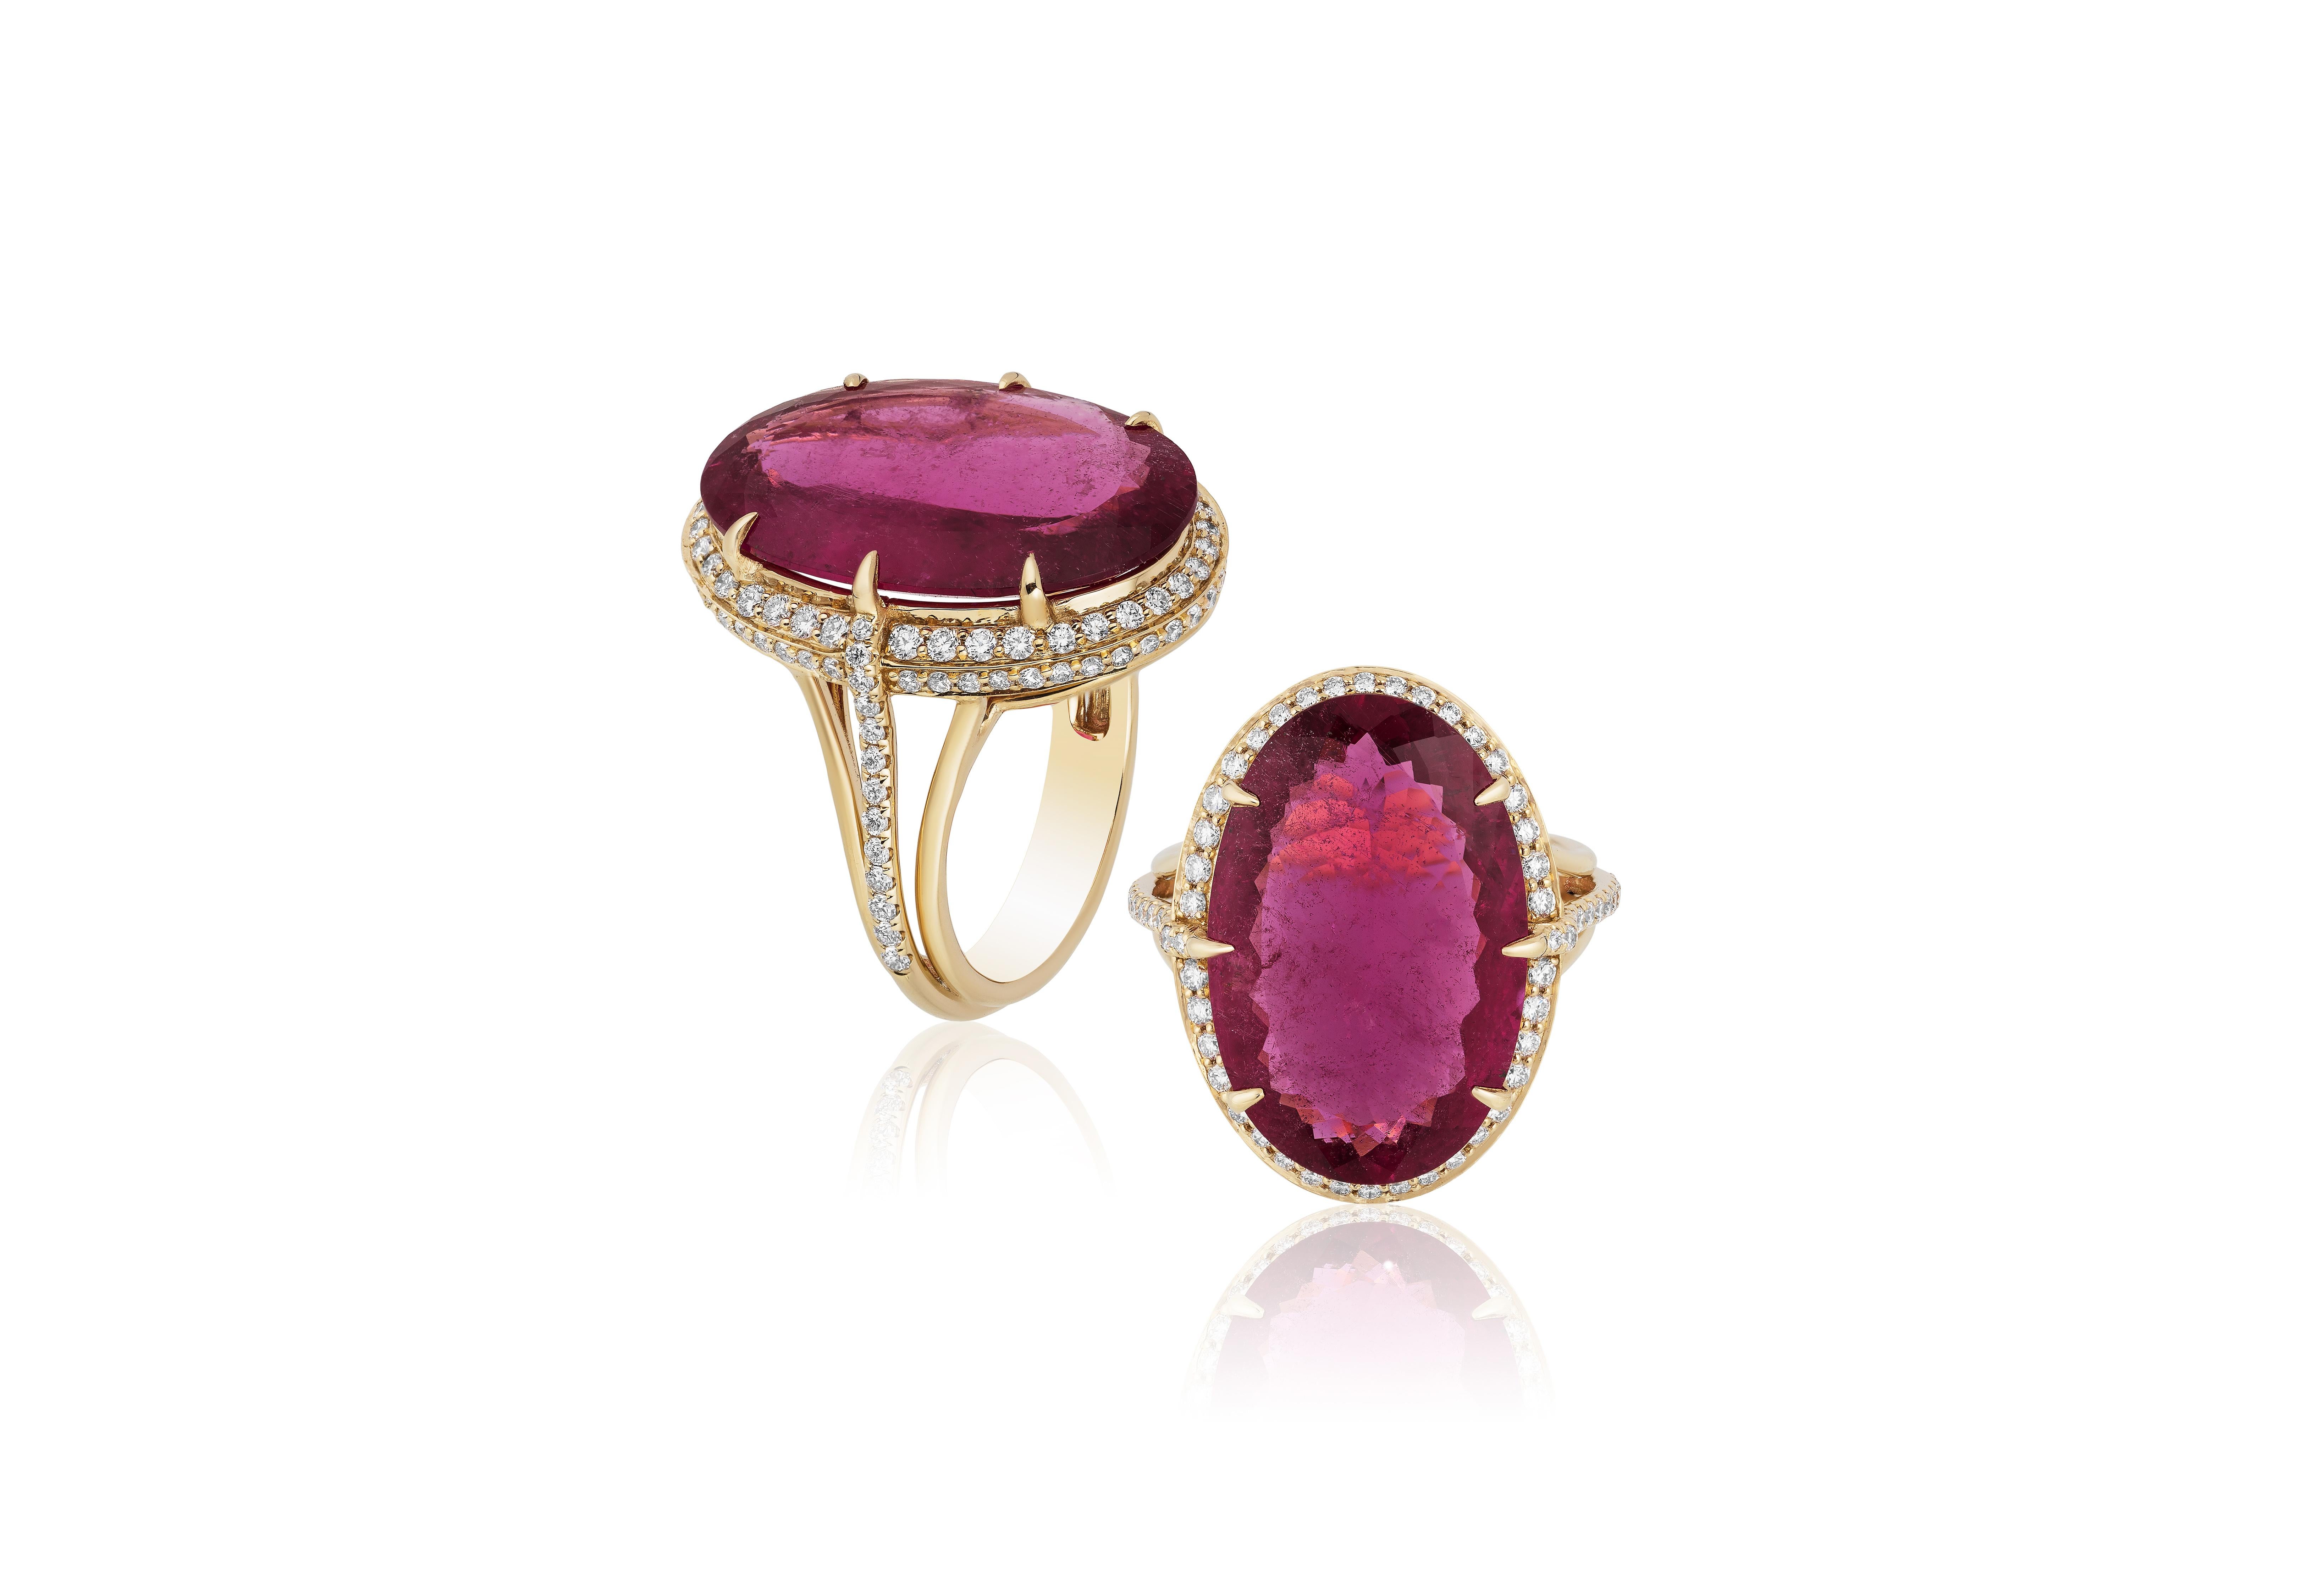 Rubelite Oval Ring with Diamonds in 18k Yellow Gold, from 'G-One' Collection

Gemstone Weight: 11.02 Carats       

Diamond: G-H / VS, Approx Wt: 0.82 Carats